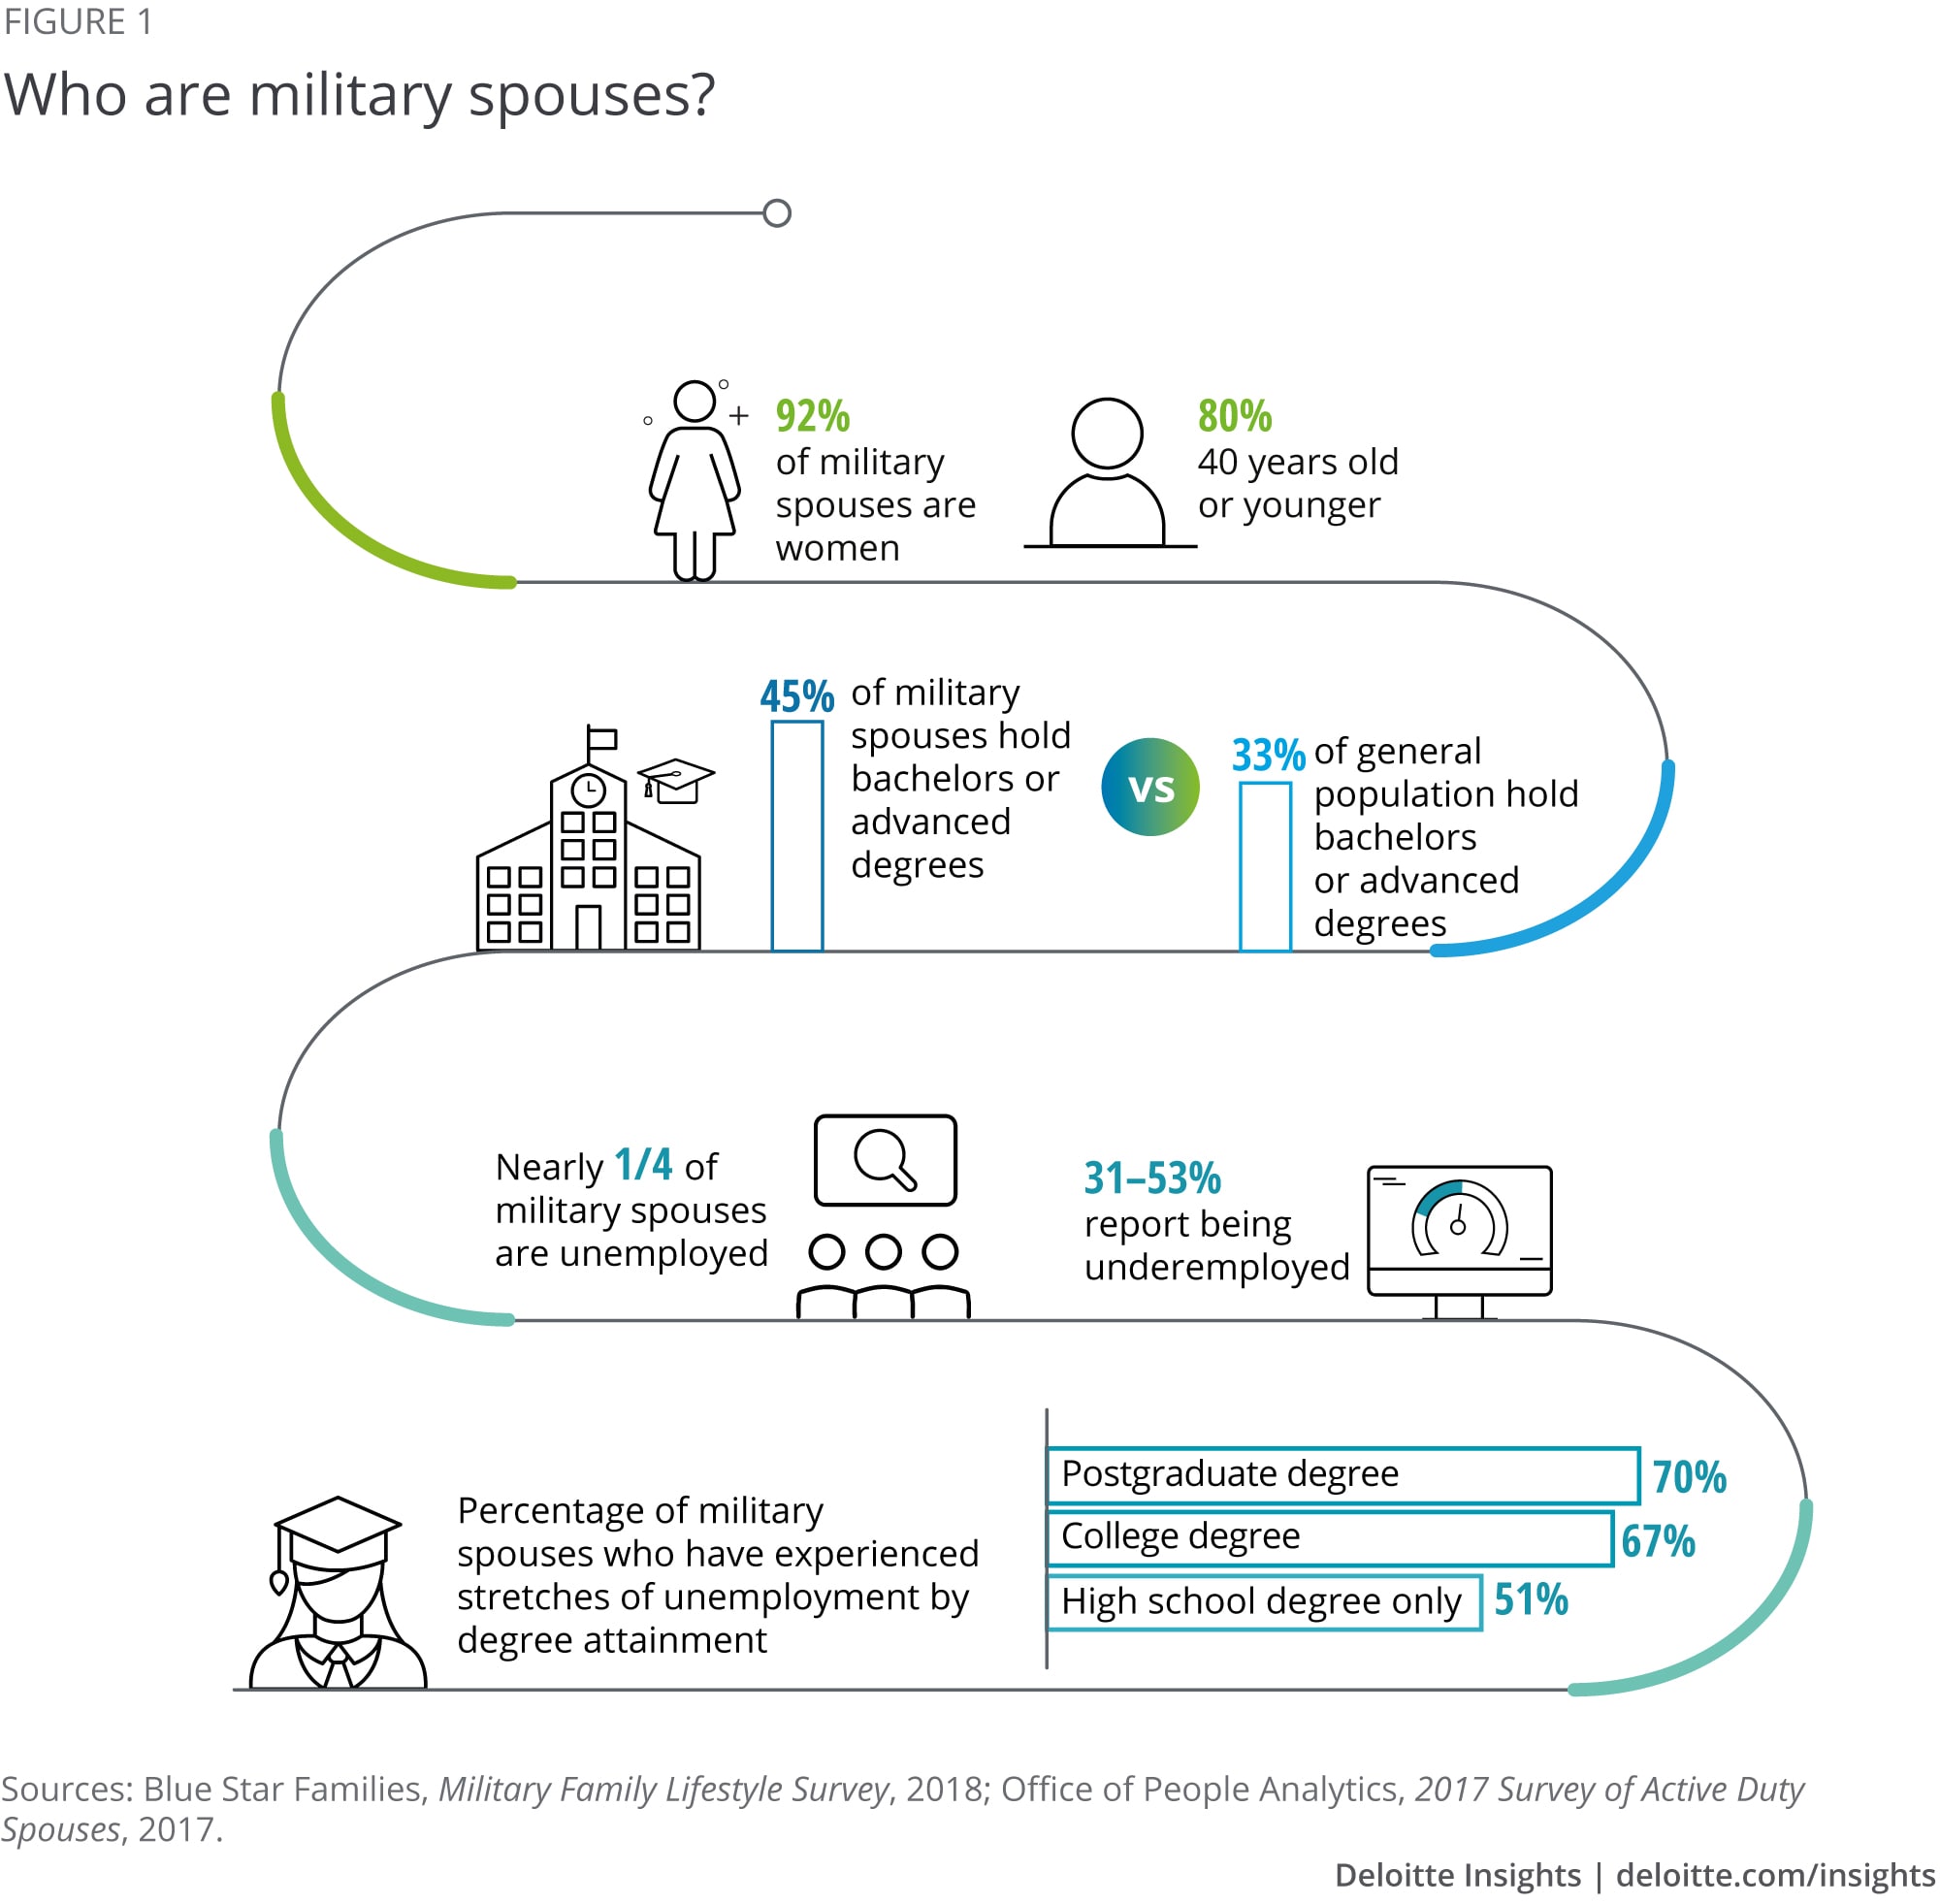 Who are military spouses?